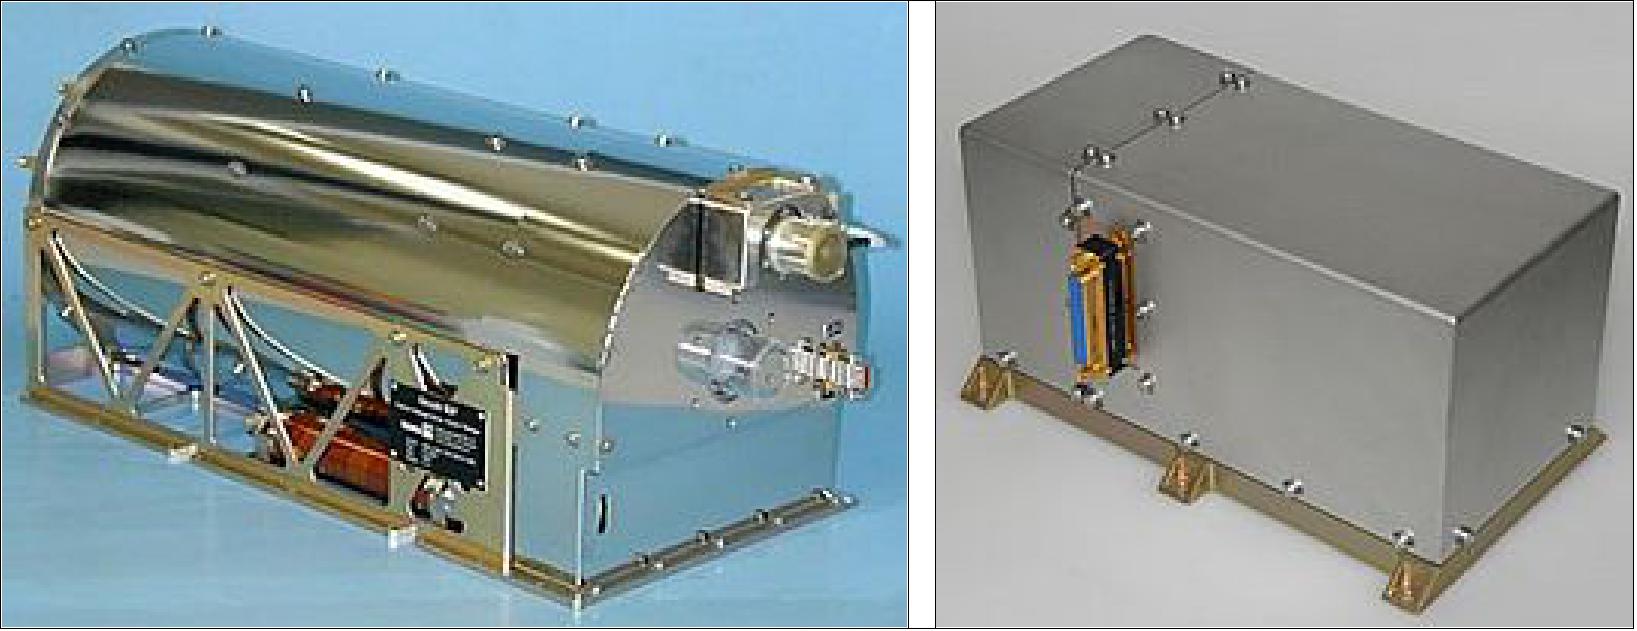 Figure 88: Photo of the two atmomic clocks, the PHM (left) and the RAFS (right), image credit: Galileo GNSS 112)